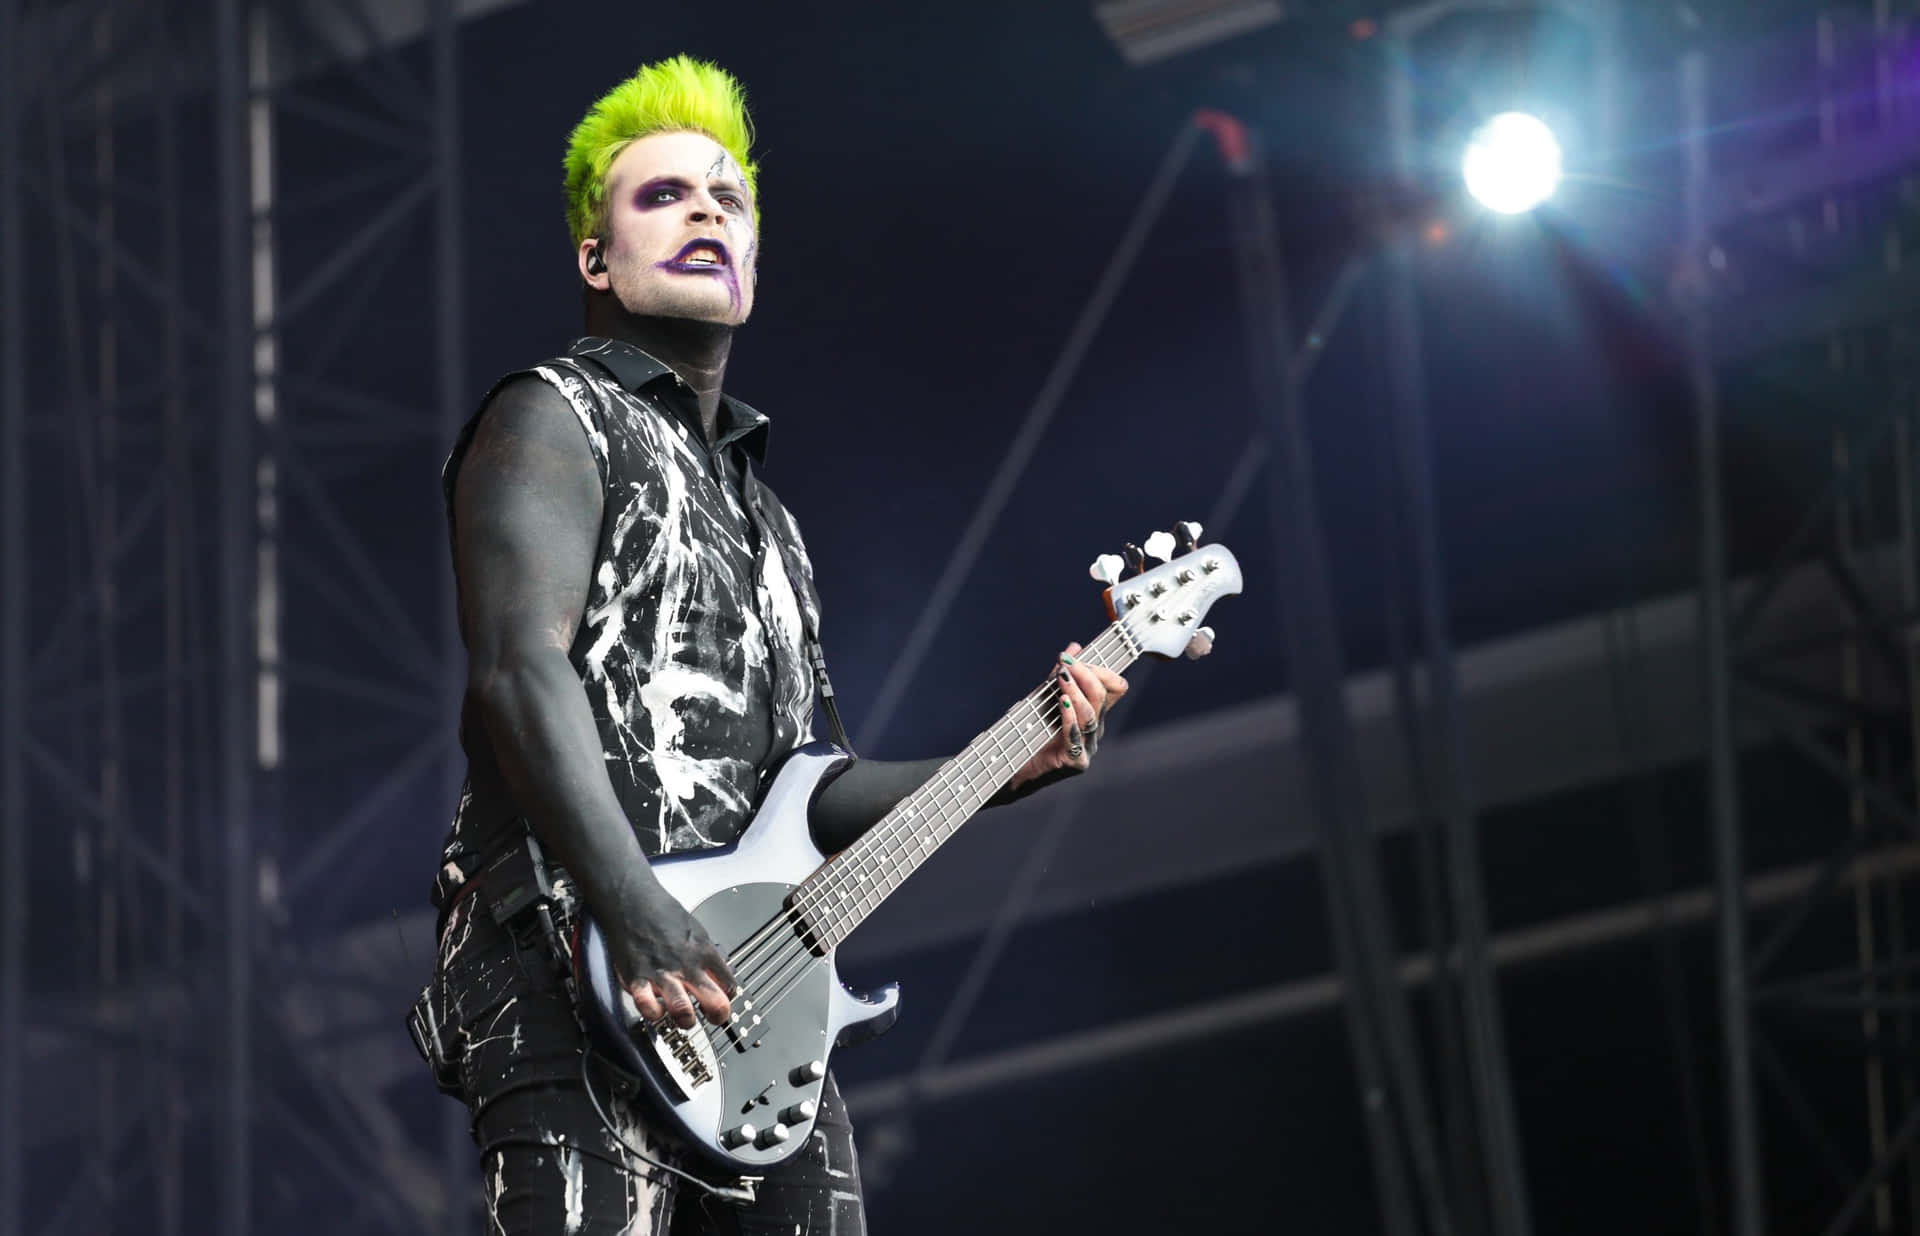 Green Haired Bassist On Stage.jpg Background